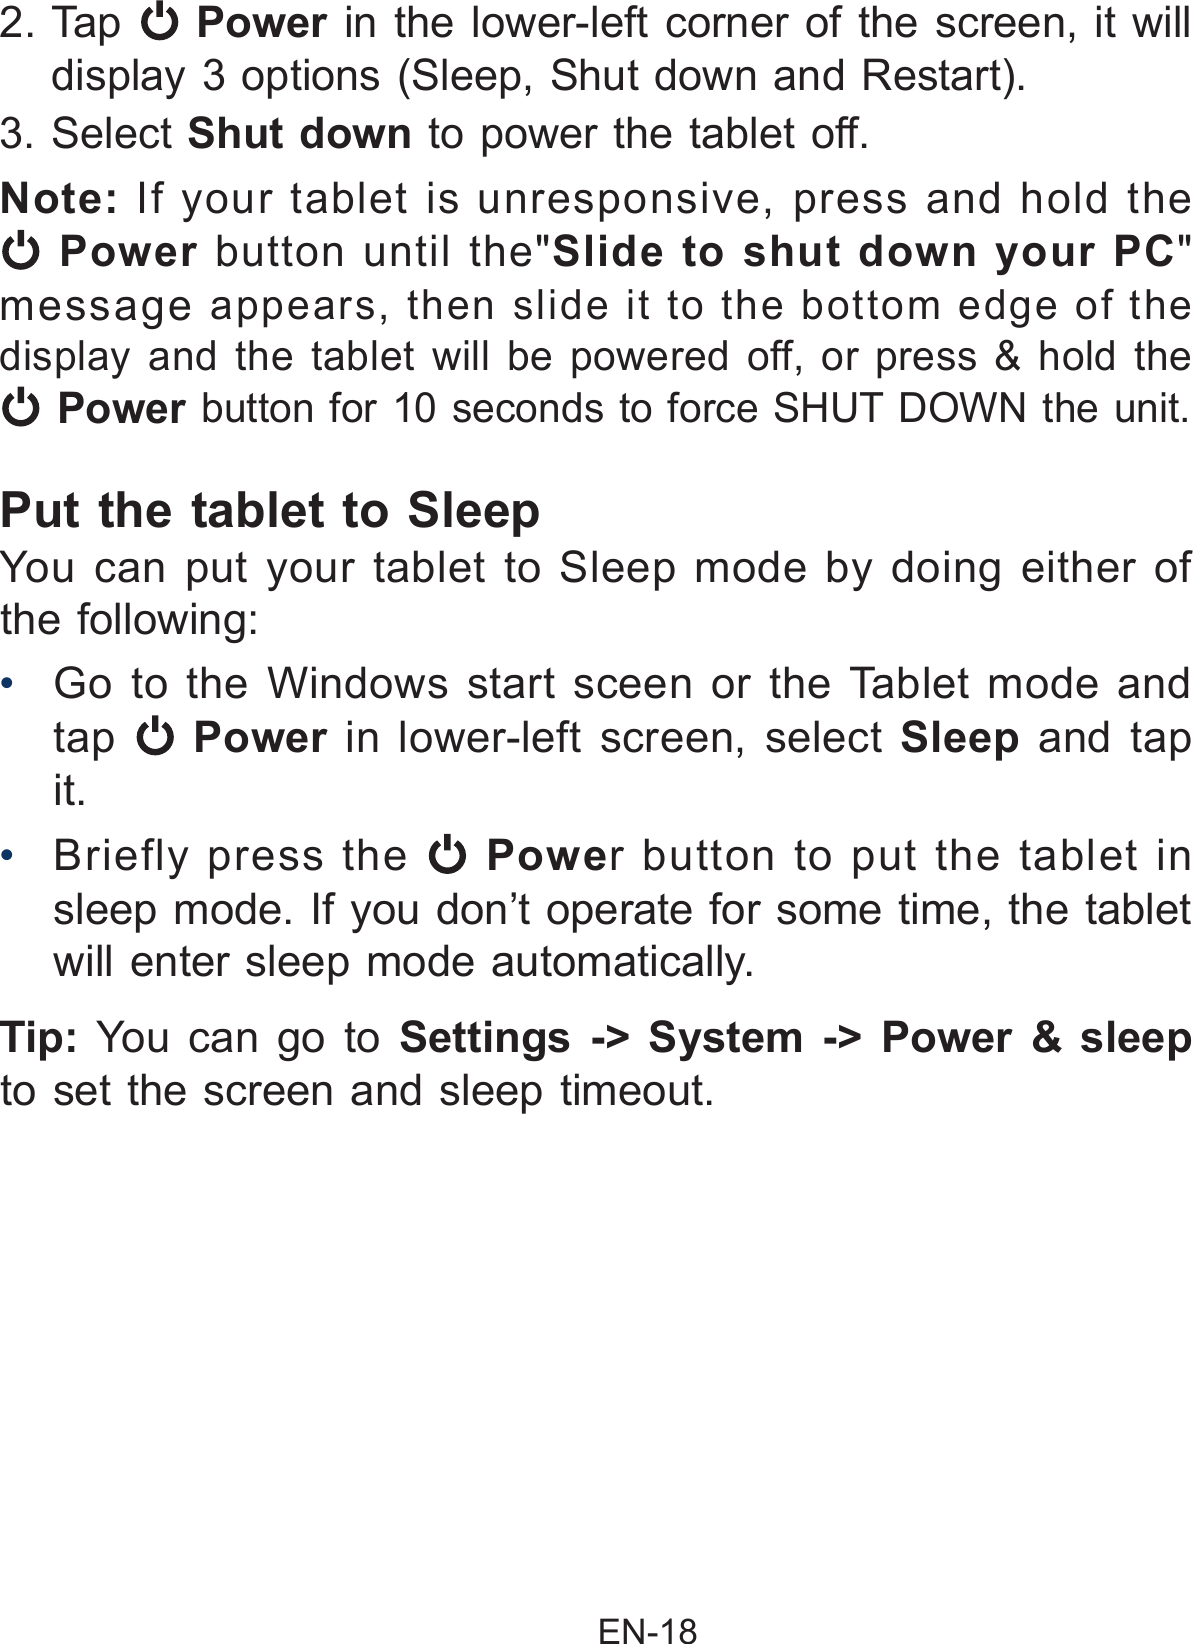                                                EN-18 Put the tablet to Sleep You can put your tablet to Sleep mode by doing either of the following:•  Go to the Windows start sceen or the Tablet mode and tap   Power  in lower-left screen, select  Sleep and tap it.•  Briefly press the   Power button to put the tablet in sleep mode. If you don’t operate for some time, the tablet will enter sleep mode automatically. Tip: You can go to Settings -&gt; System -&gt; Power &amp; sleep to set the screen and sleep timeout.2. Tap   Power in the lower-left corner of the screen, it will display 3 options (Sleep, Shut down and Restart). 3. Select Shut down to power the tablet off. Note: If your tablet is unresponsive, press and hold the  Power button until the&quot;Slide to shut down your PC&quot; message  appears, then slide it to the bottom edge of the display and the tablet will be powered off, or press &amp; hold the  Power button for 10 seconds to force SHUT DOWN the unit. 